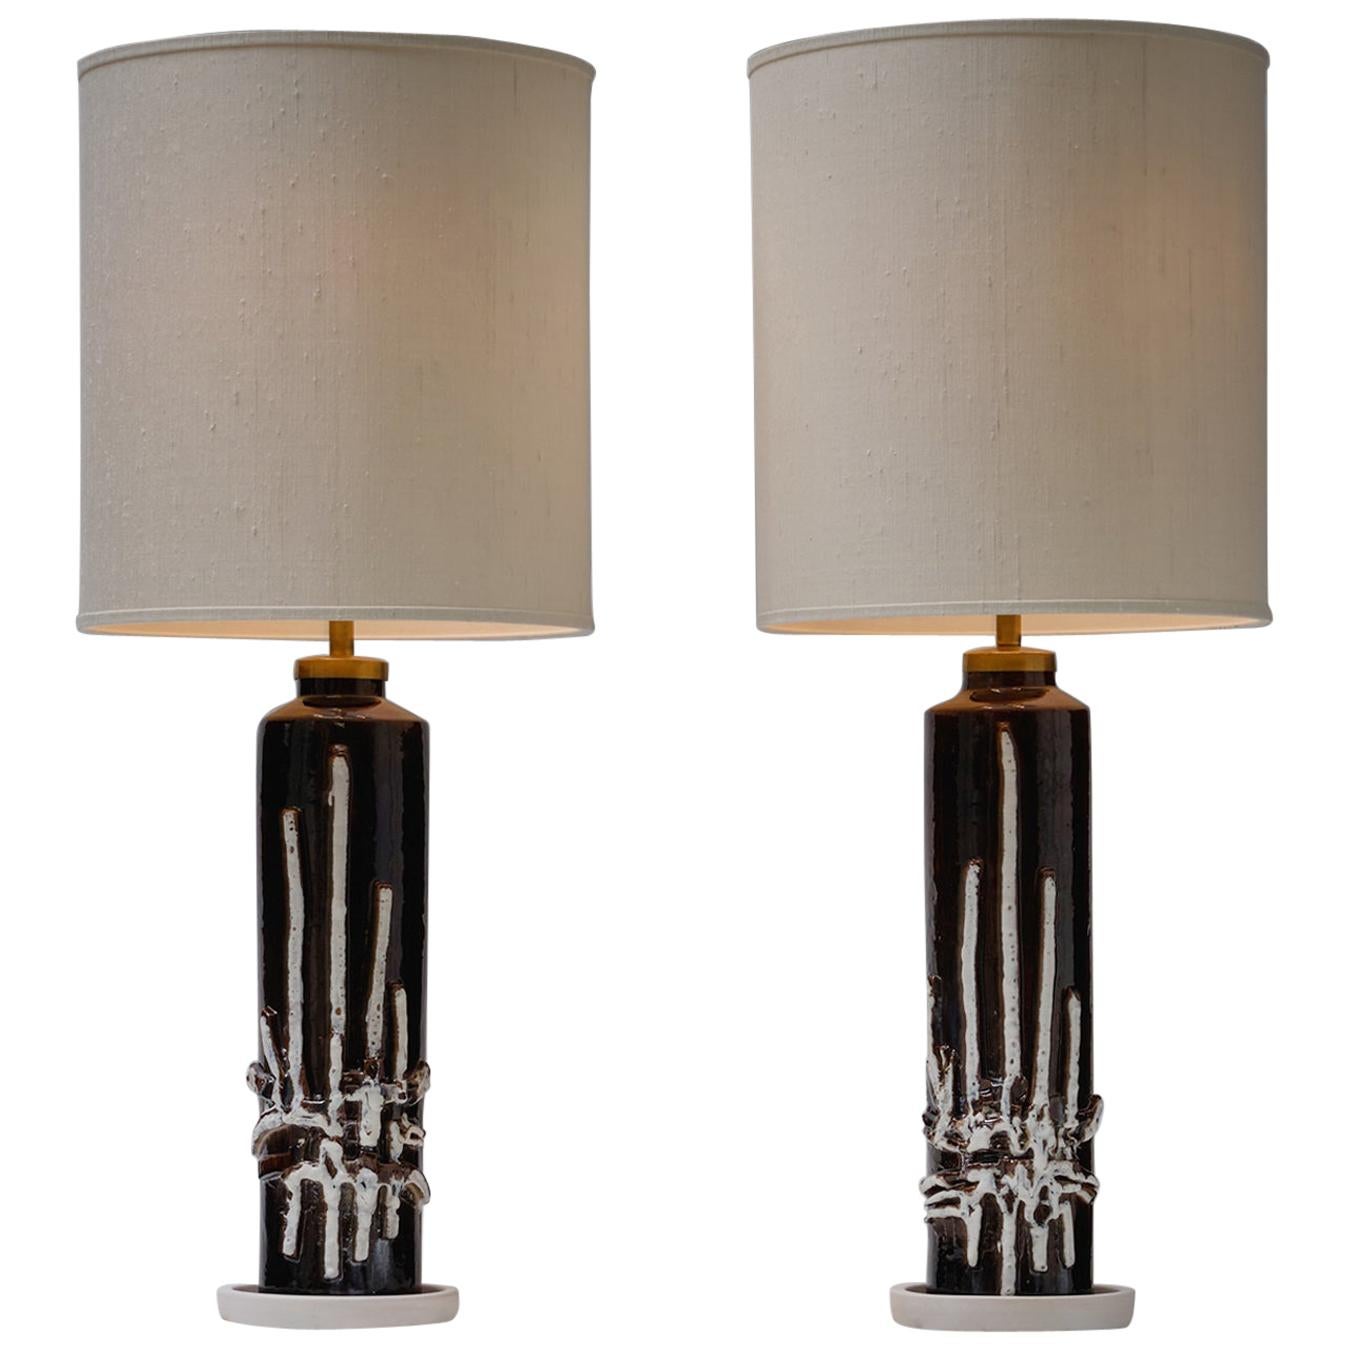 Set of Two Large Italian Ceramic Table Lamps, 1960s